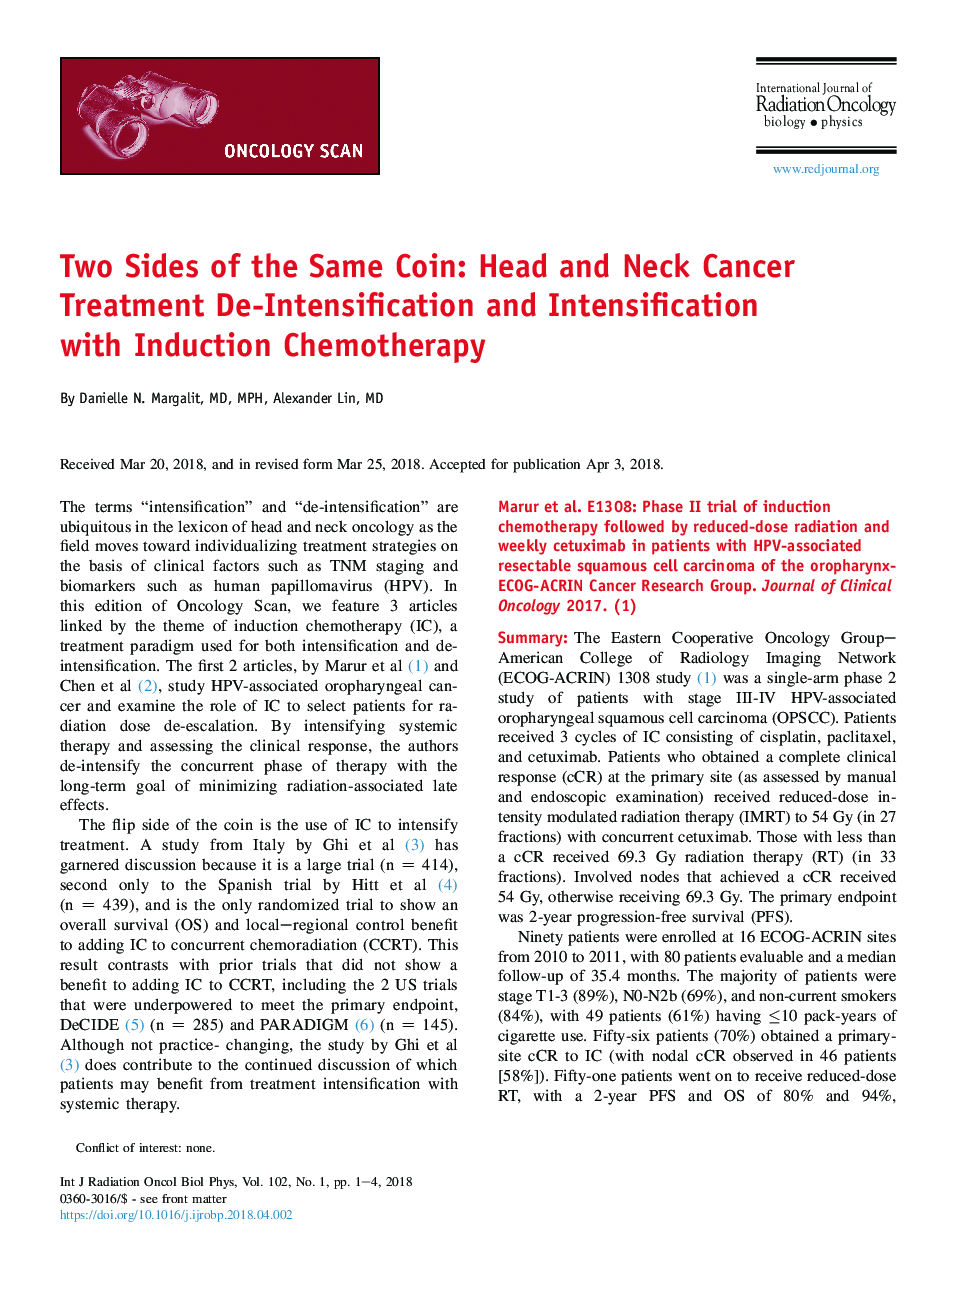 Two Sides of the Same Coin: Head and Neck Cancer Treatment De-Intensification and Intensification with Induction Chemotherapy